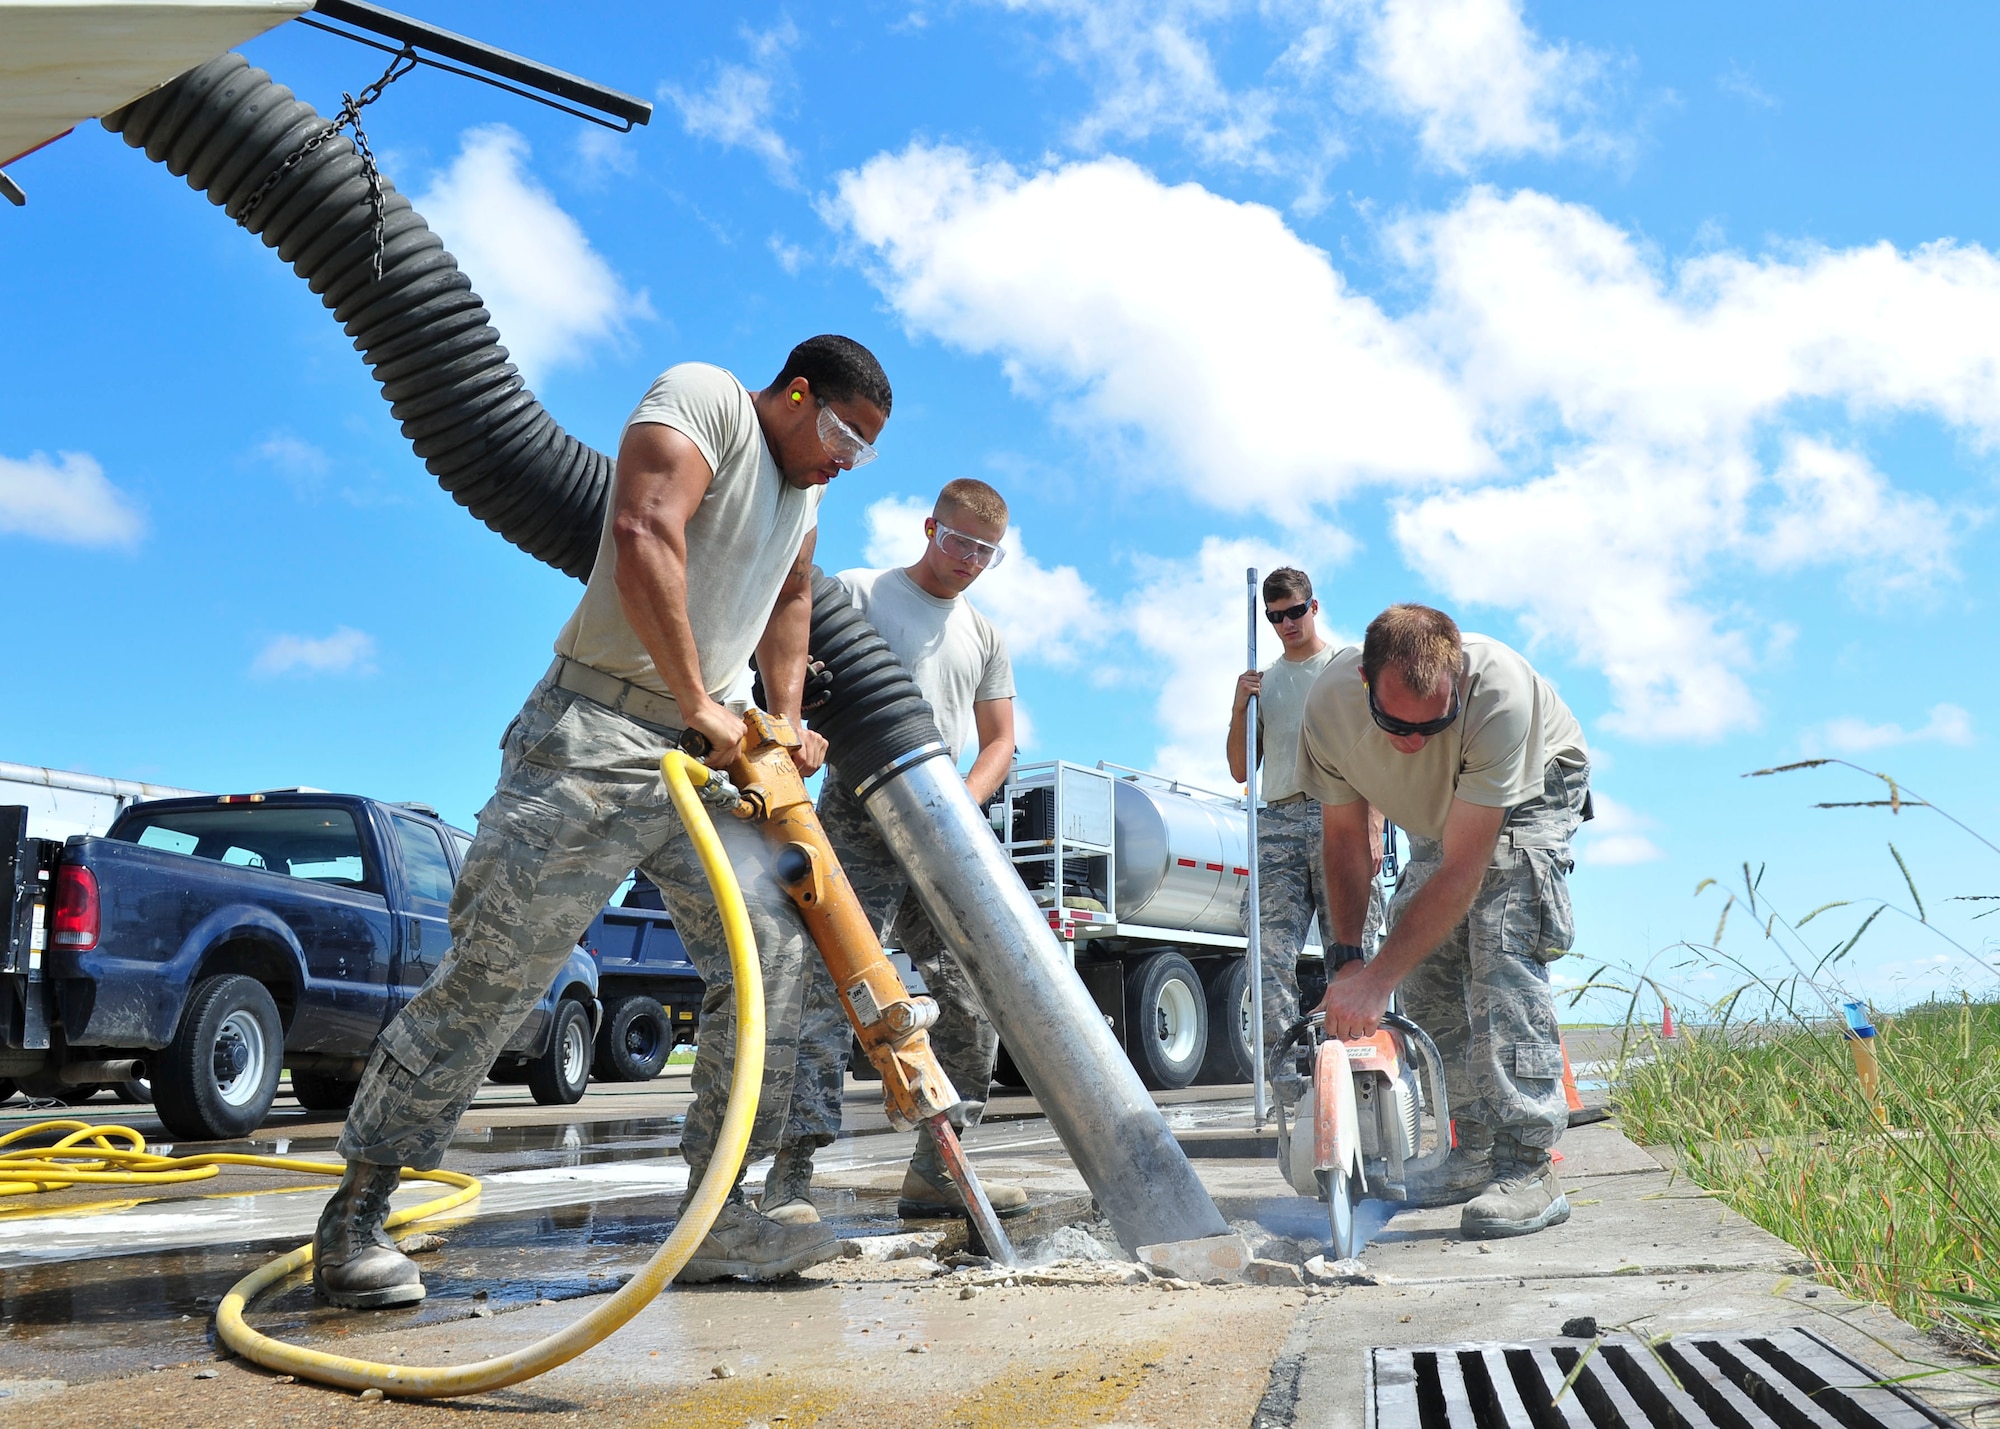 Airmen from the 633rd Civil Engineer Squadron repair sections of the runway Aug. 27, 2014, at Langley Air Force Base, Va. The improvements will provide a safe environment to sustain current flying operations and secure future mission capability. (U.S. Air Force photo/Senior Airman Connor Estes)